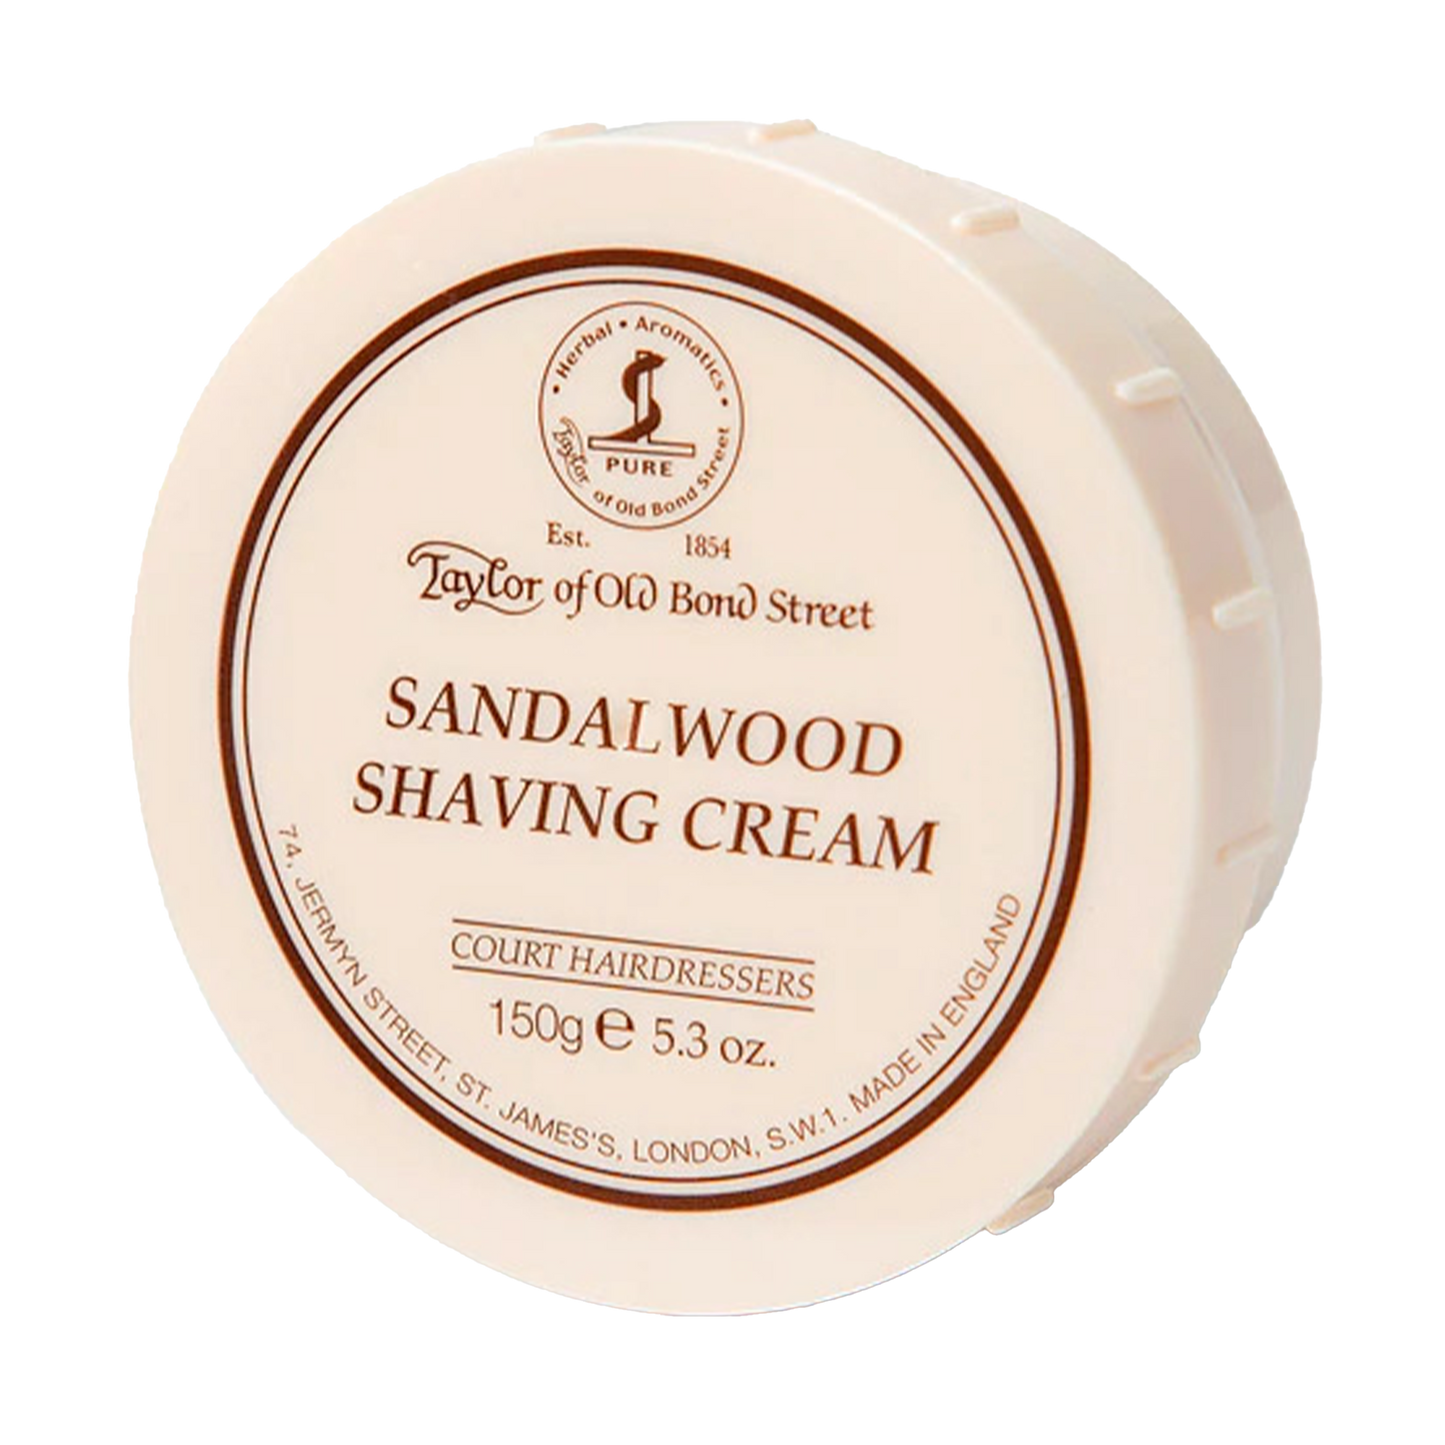 Taylor of Old Bond Street Sandalwood Shaving Cream Bowl: A Taylor of Old Bond Street classic. Known to all wet shaving enthusiasts, having a luxurious and masculine sandalwood fragrance. This shaving cream creates a uniquely smooth and creamy lather for a fresh shave.